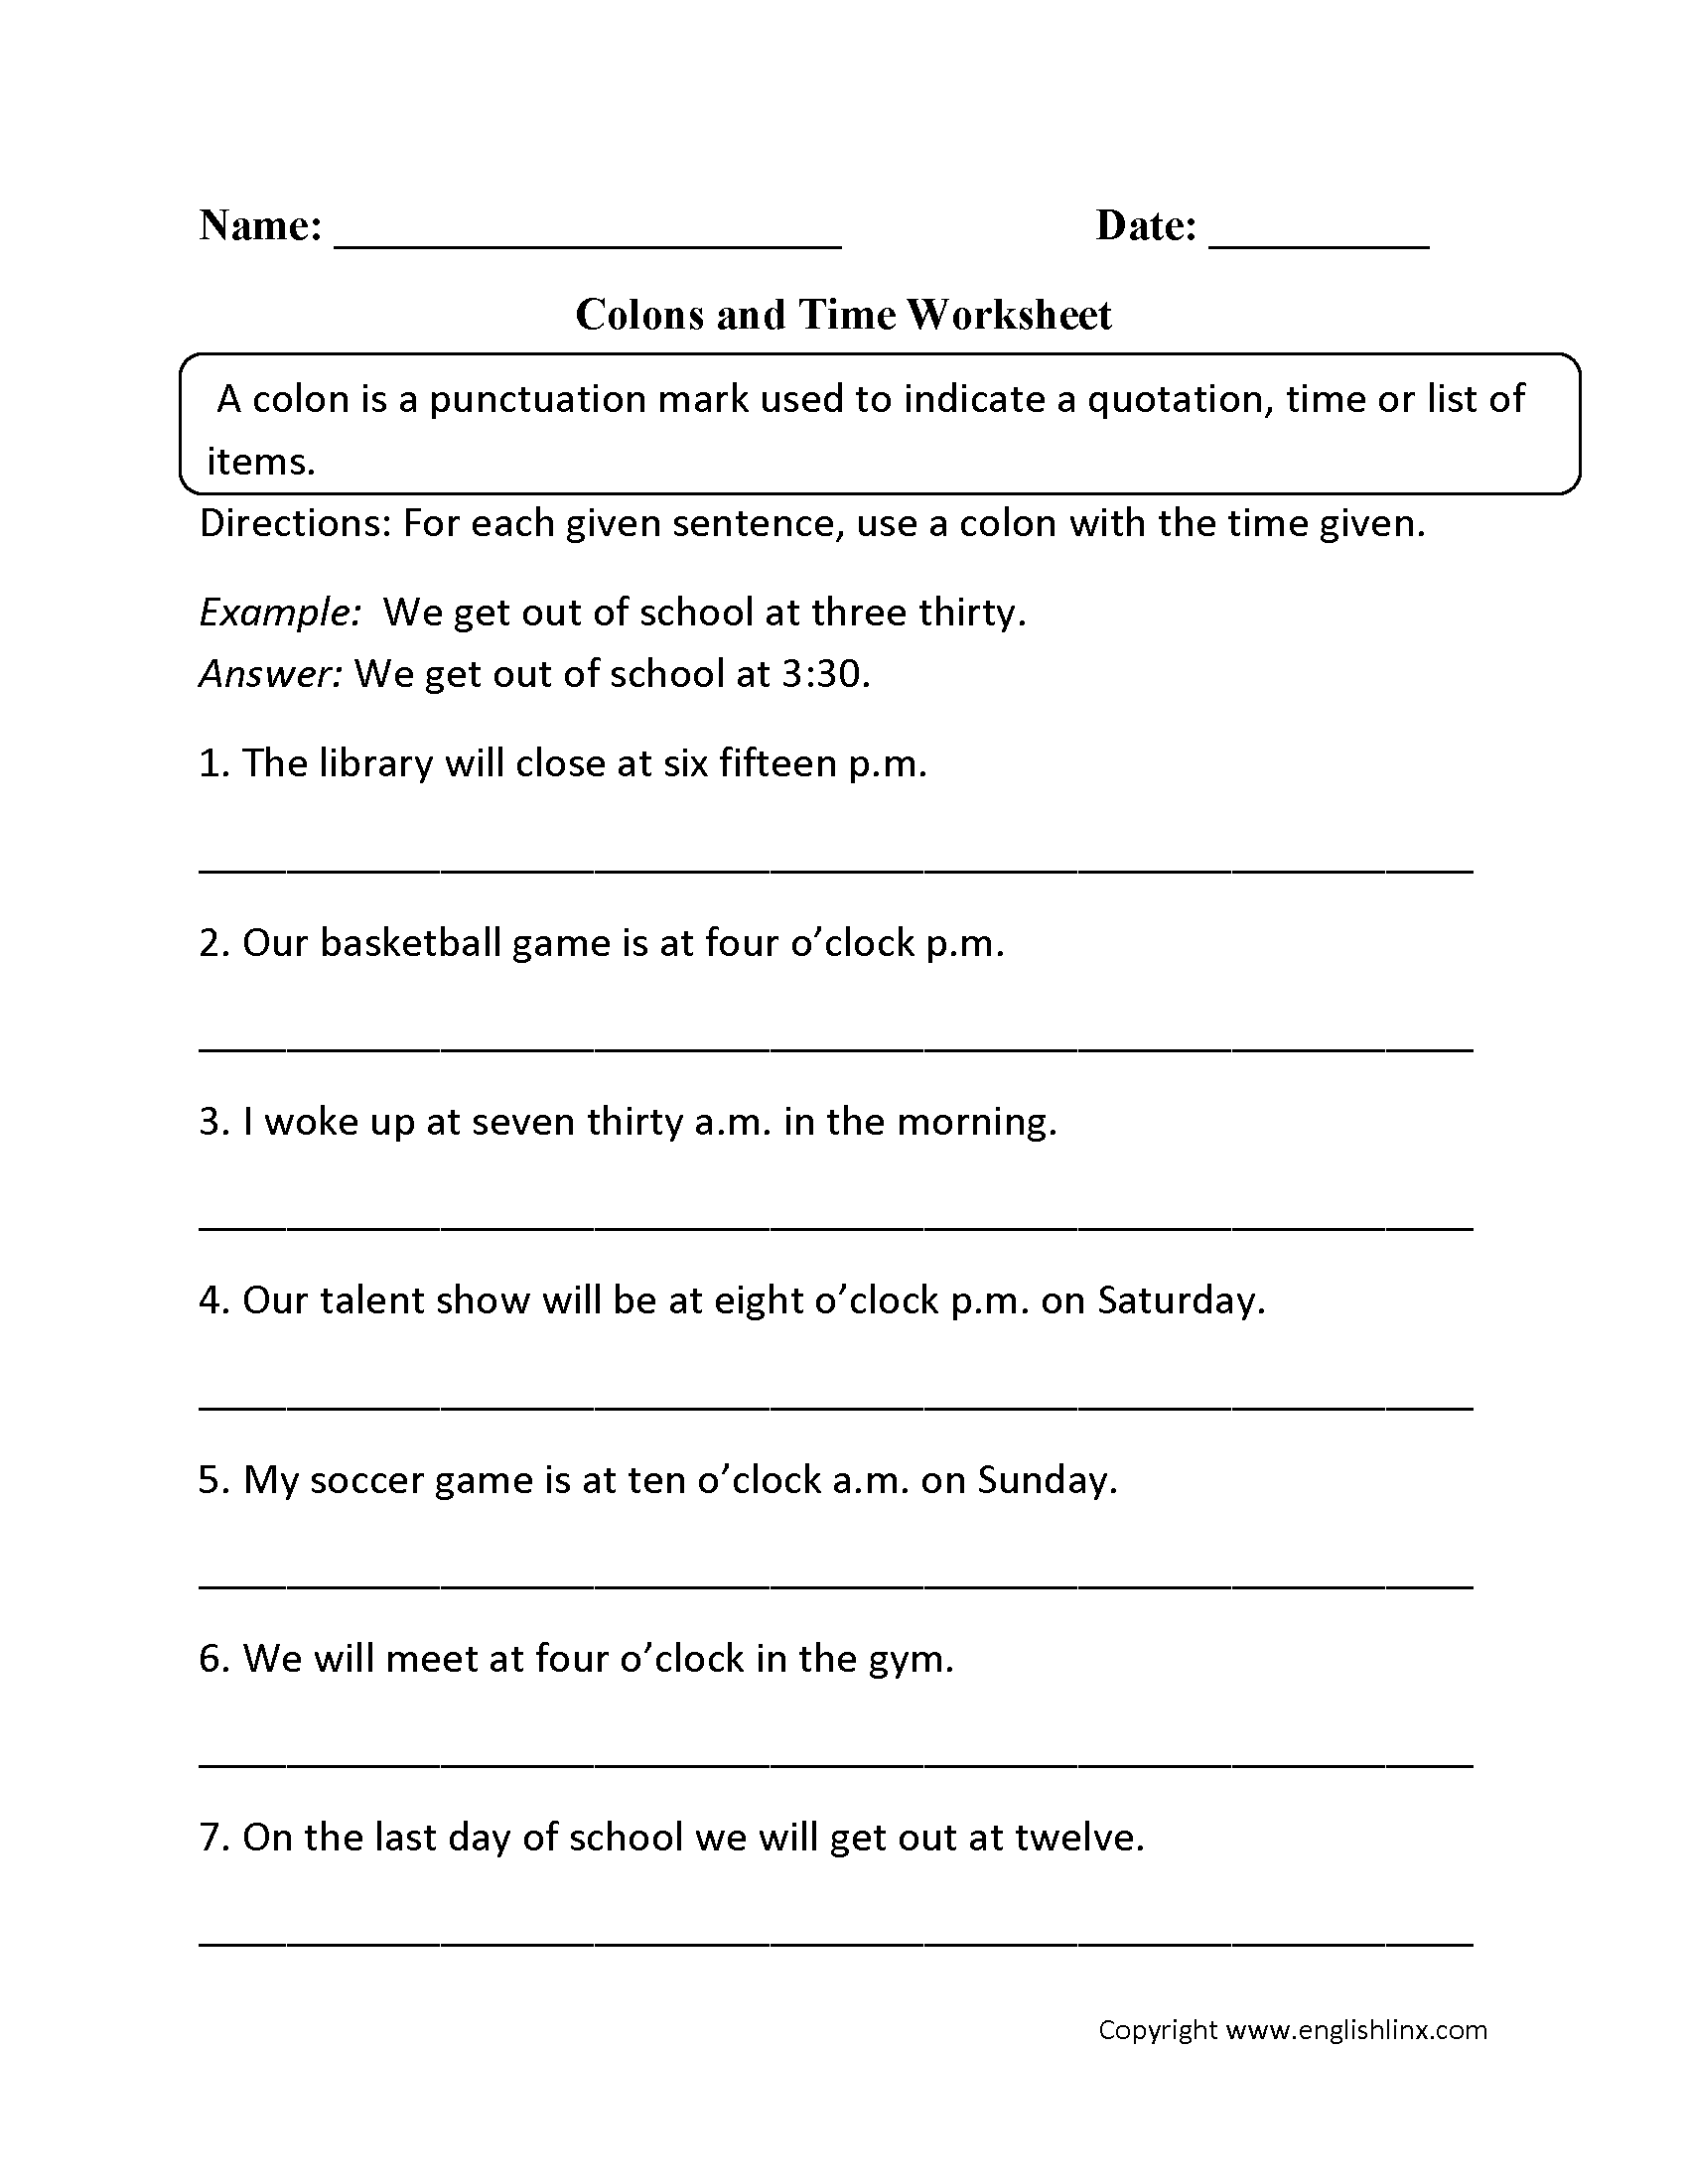 Colons and Time Worksheet